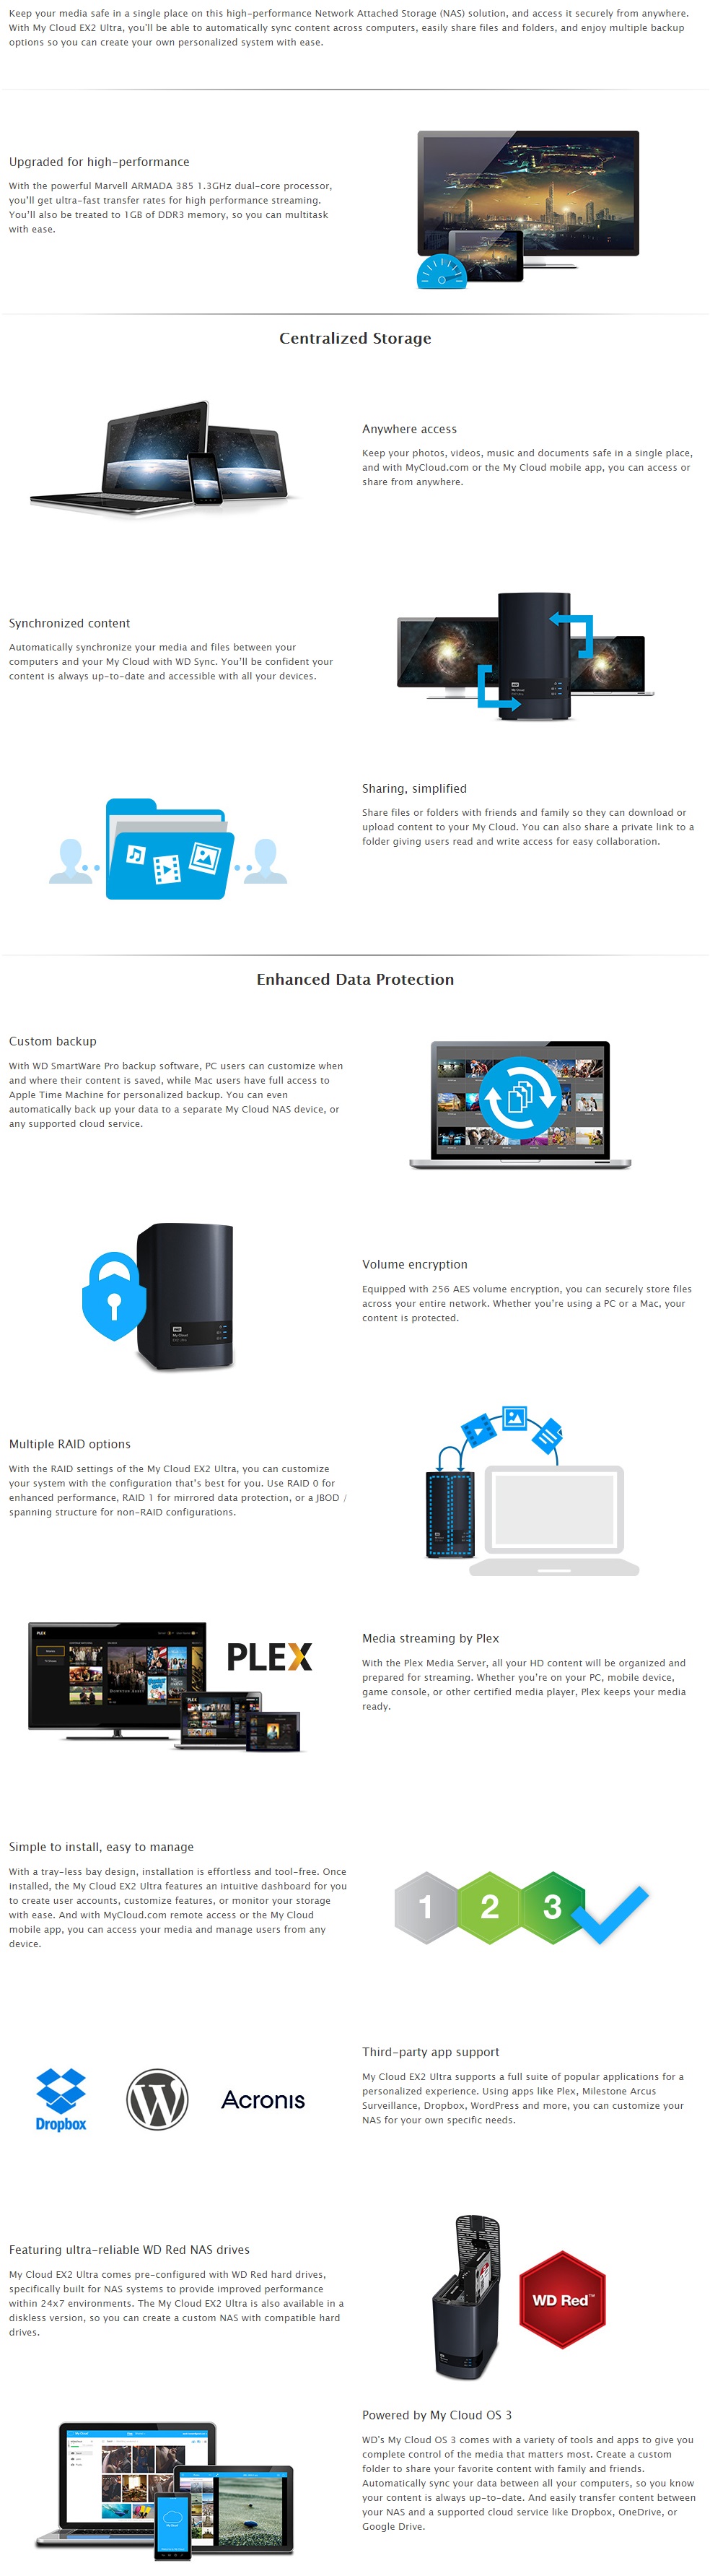 A large marketing image providing additional information about the product WD My Cloud Expert EX2 Ultra 4TB 2 Bay NAS Enclosure - Additional alt info not provided